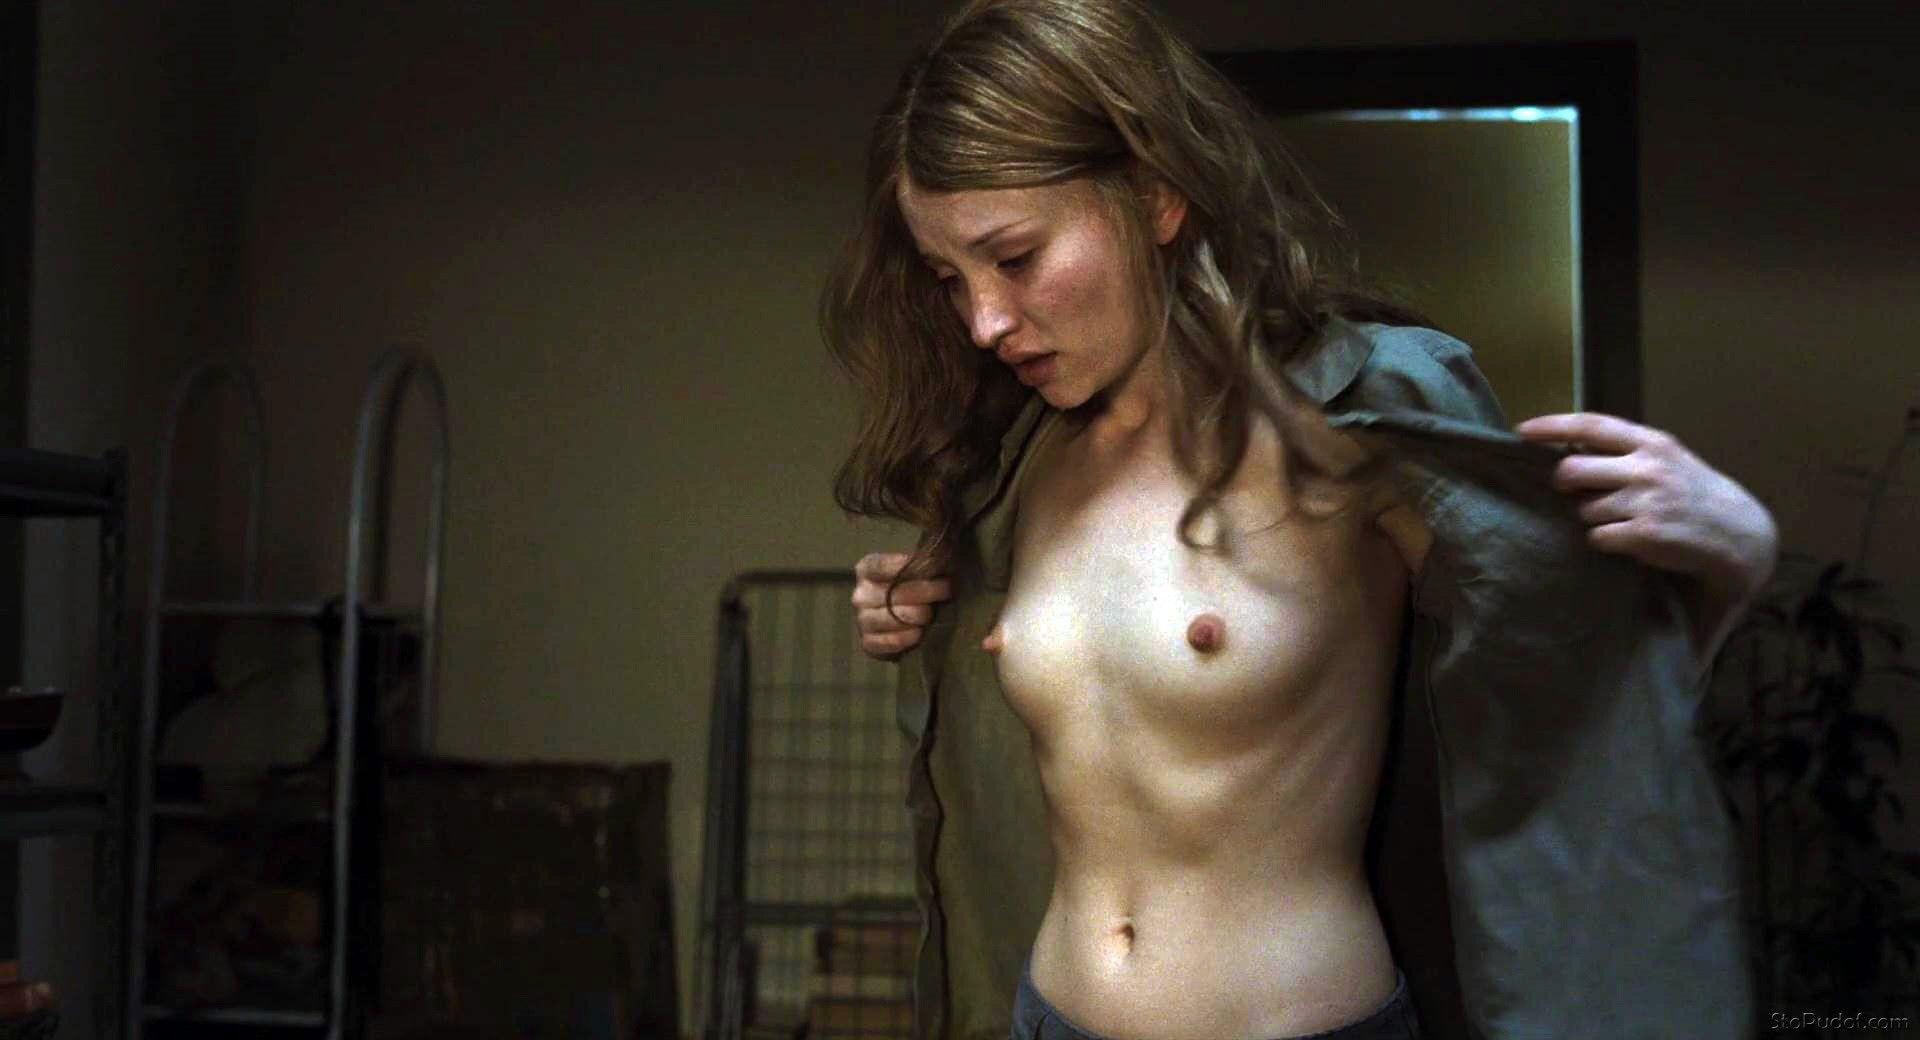 Hot Emily Browning In American Gods - S01e05 Free HQ Porn Video